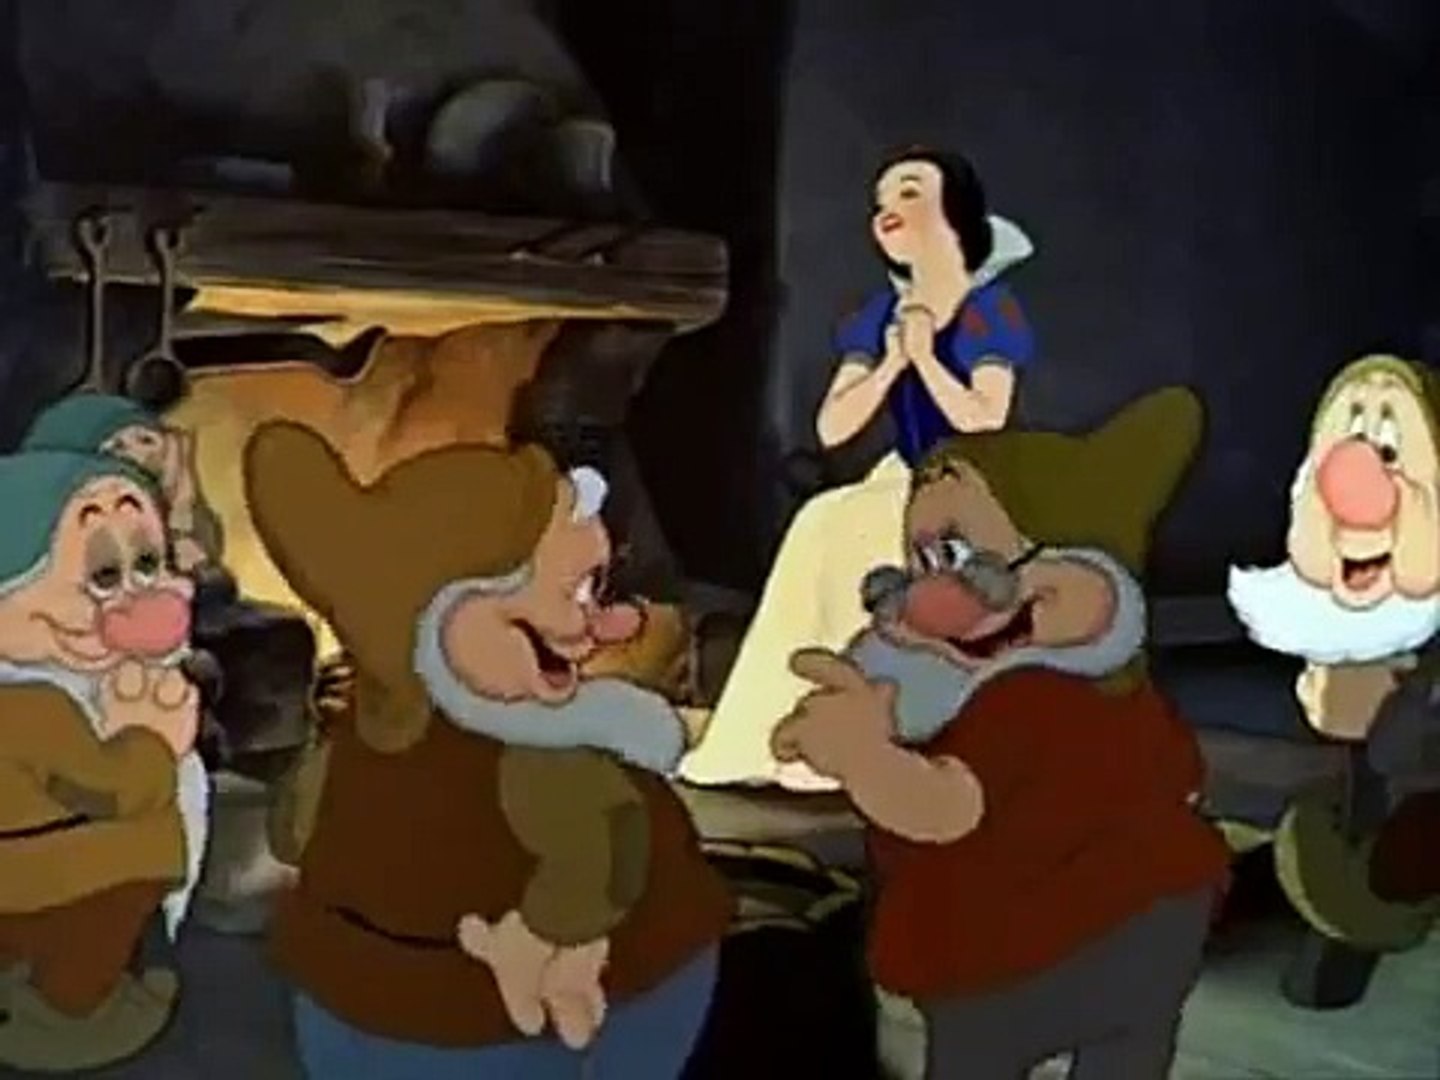 Snow White Someday My Prince Will Come Latest Cartoons 15 Video Dailymotion